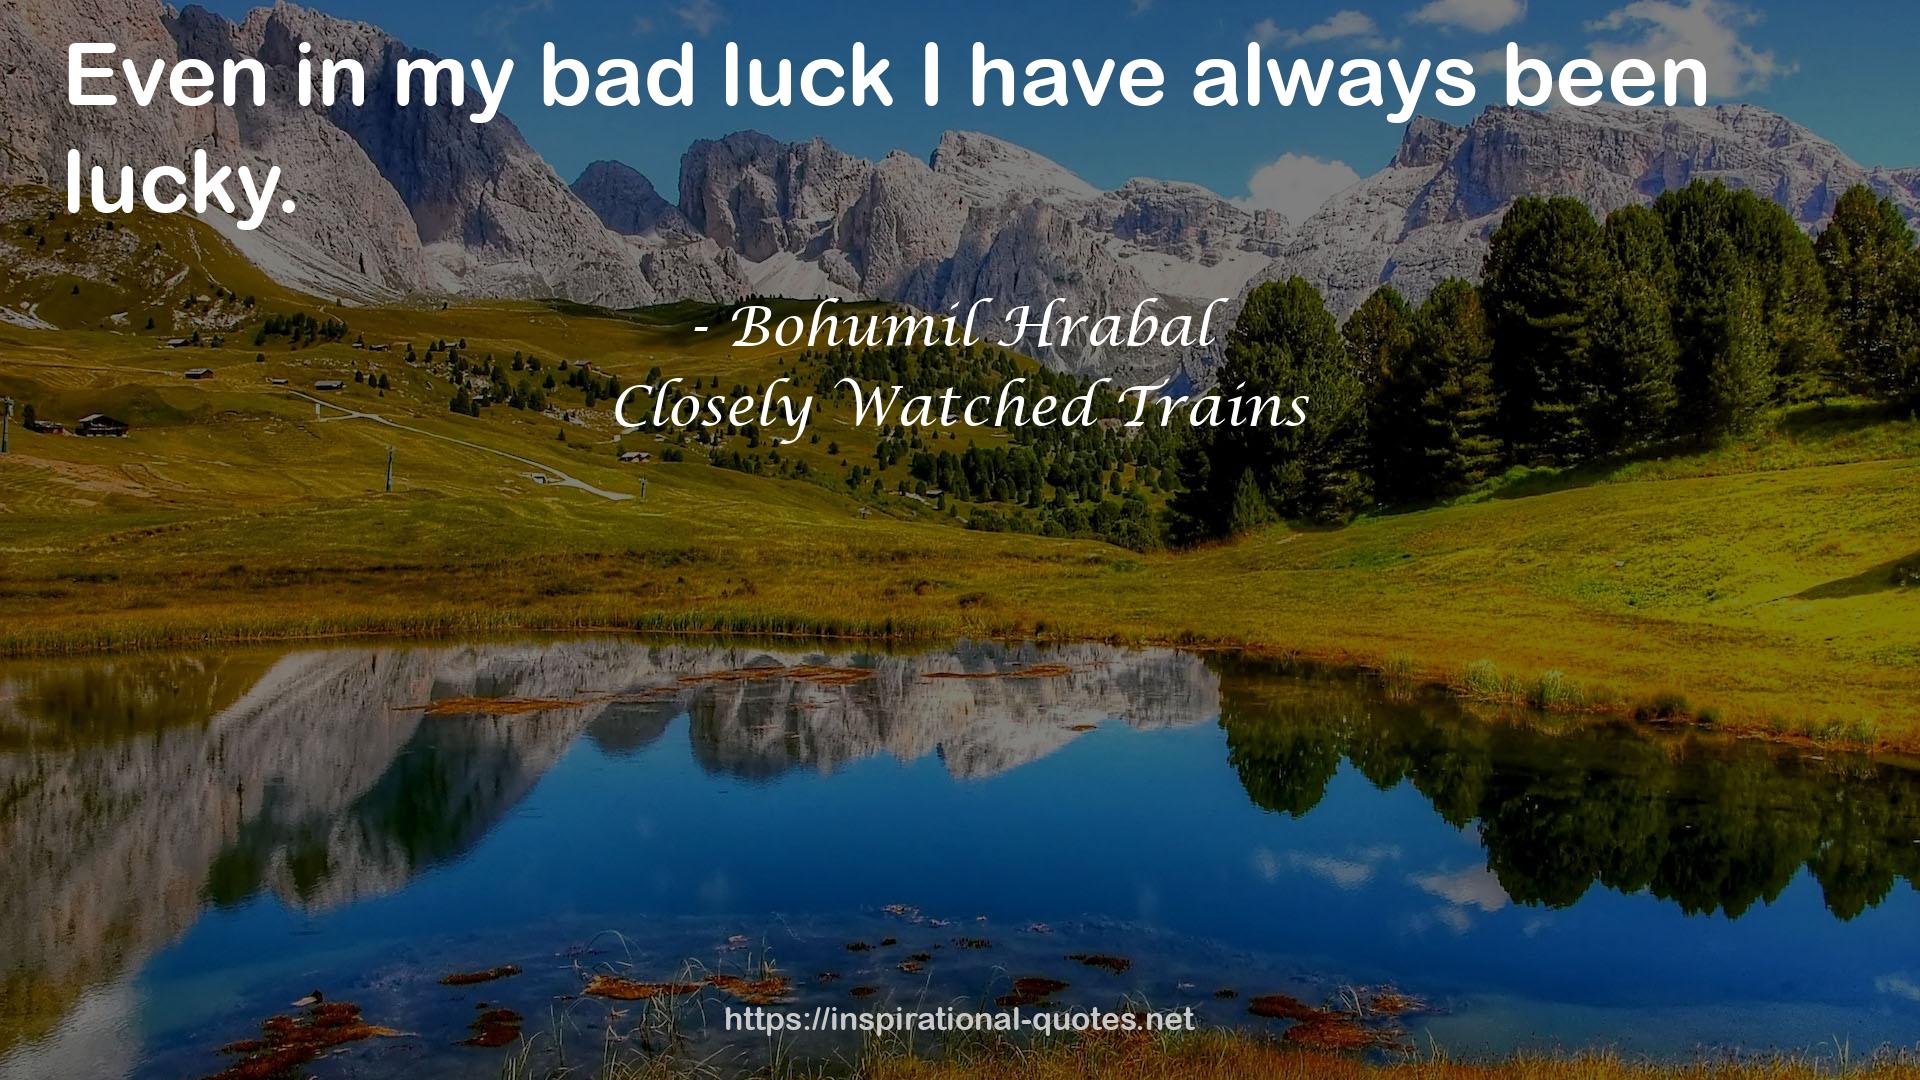 Closely Watched Trains QUOTES